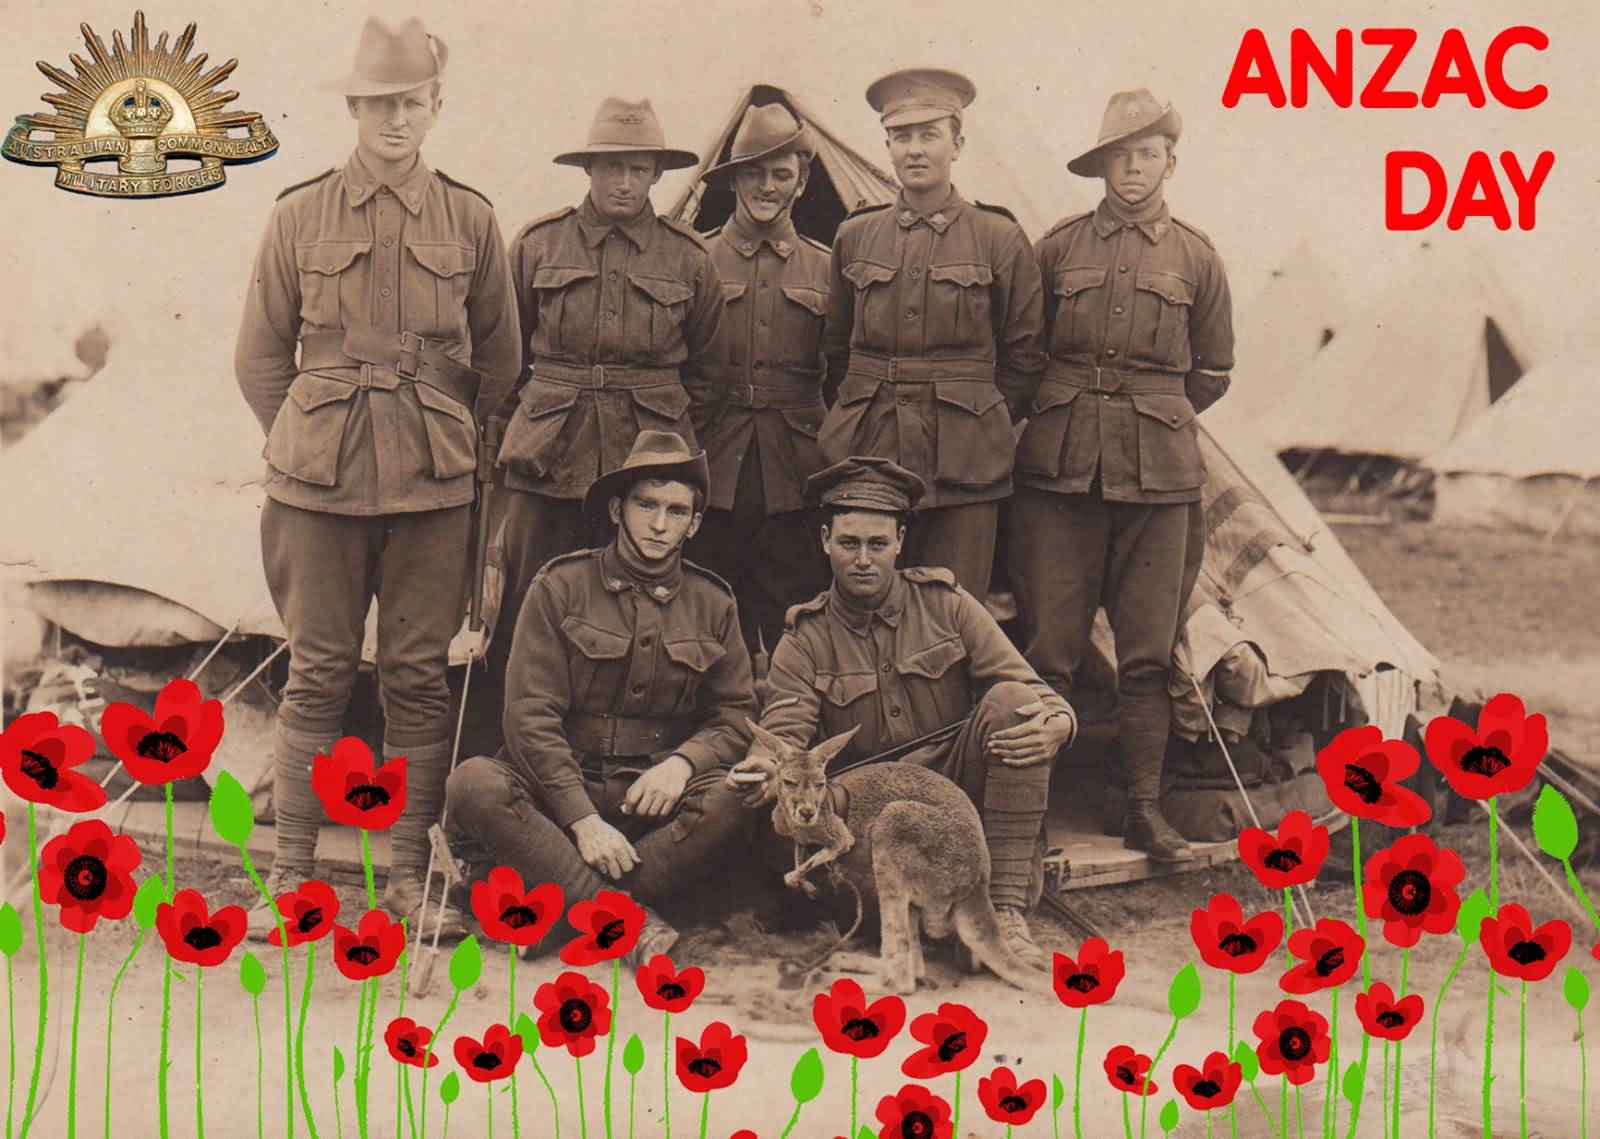 Anzac Day Army Men Posing For Photograph Poppy Flowers